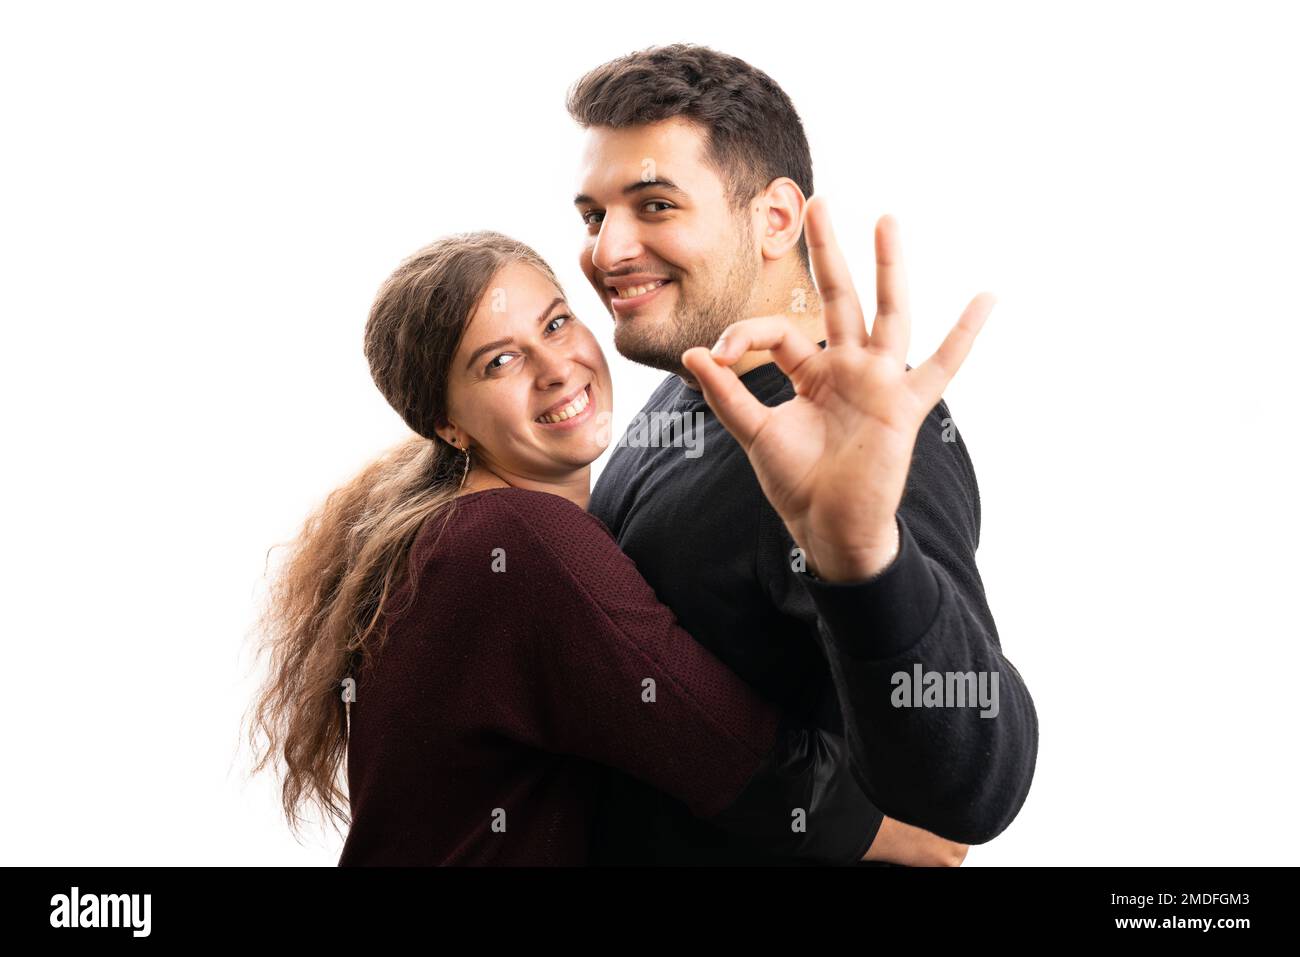 Cheerful girlfriend hugging adult boyfriend making okay gesture with fingers as romance love couple concept isolated on white background Stock Photo